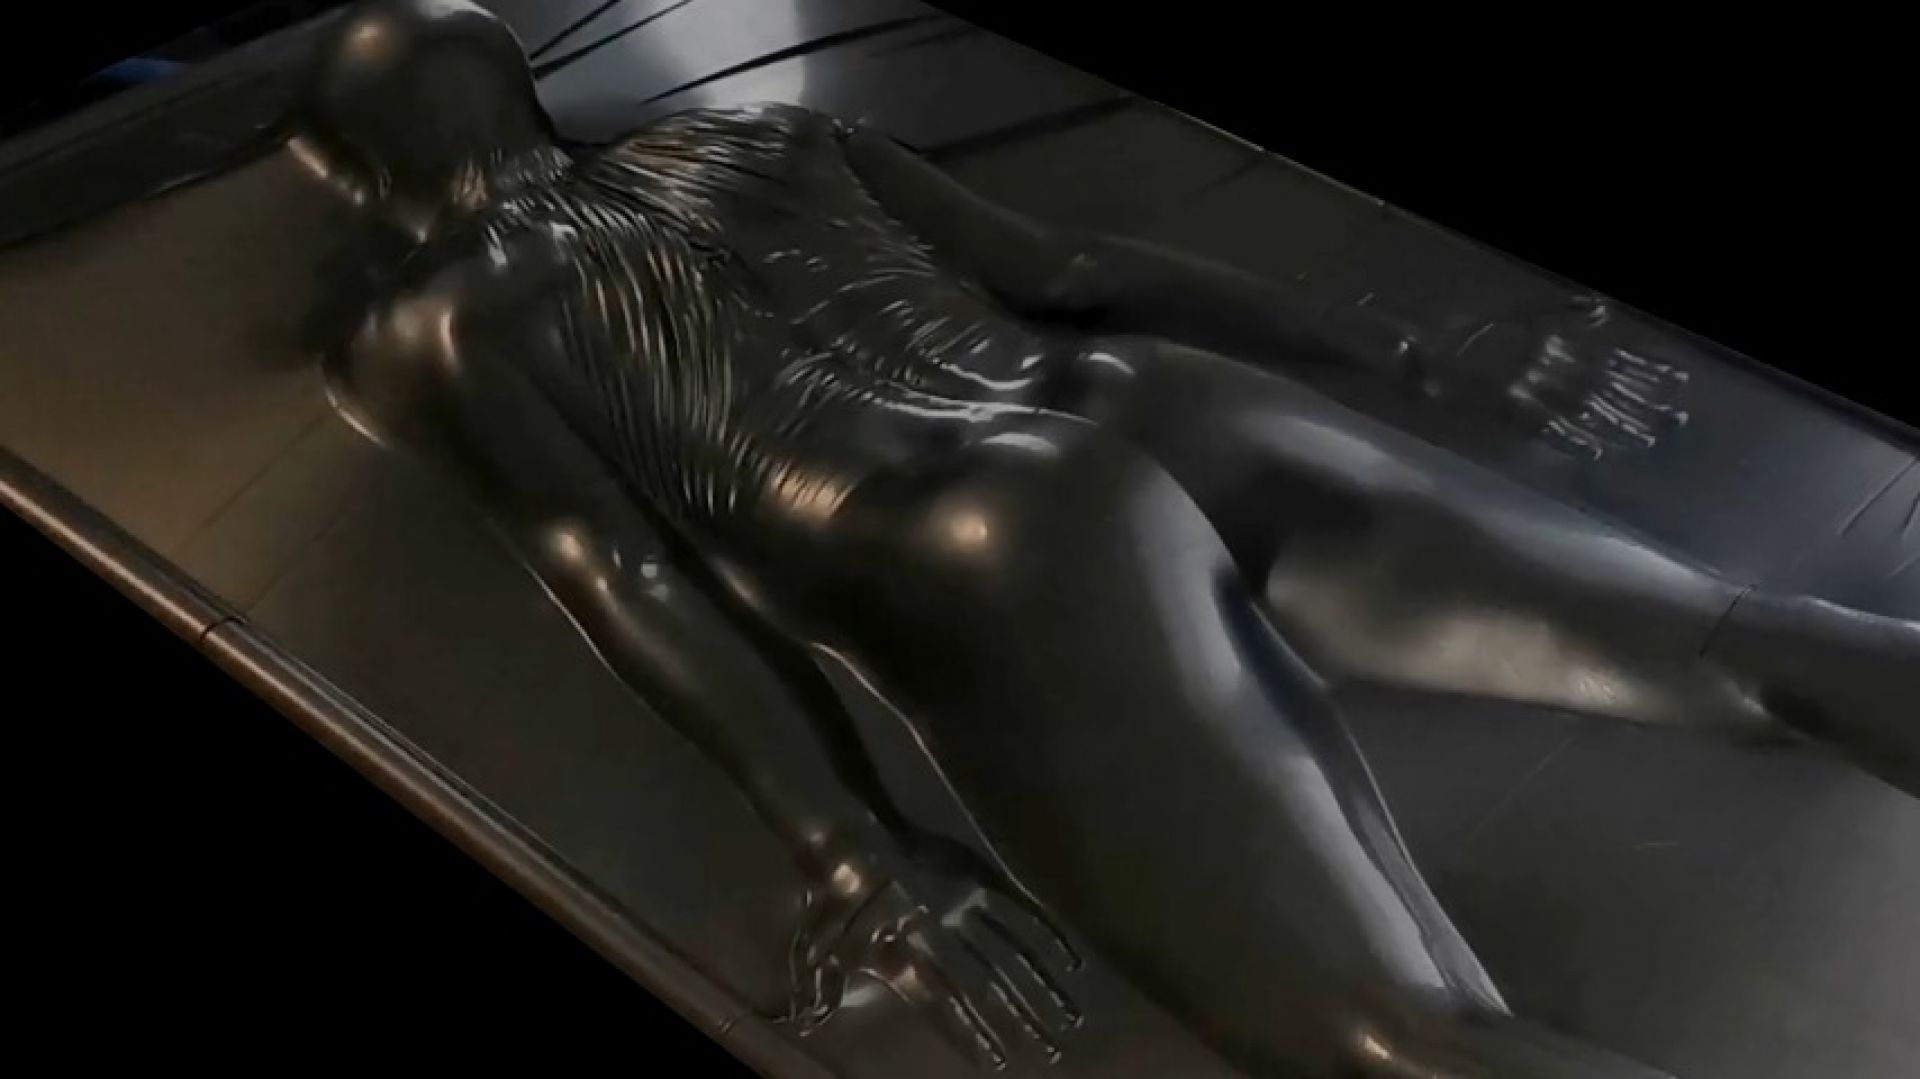 Sealed face down in a skintight black vacbed